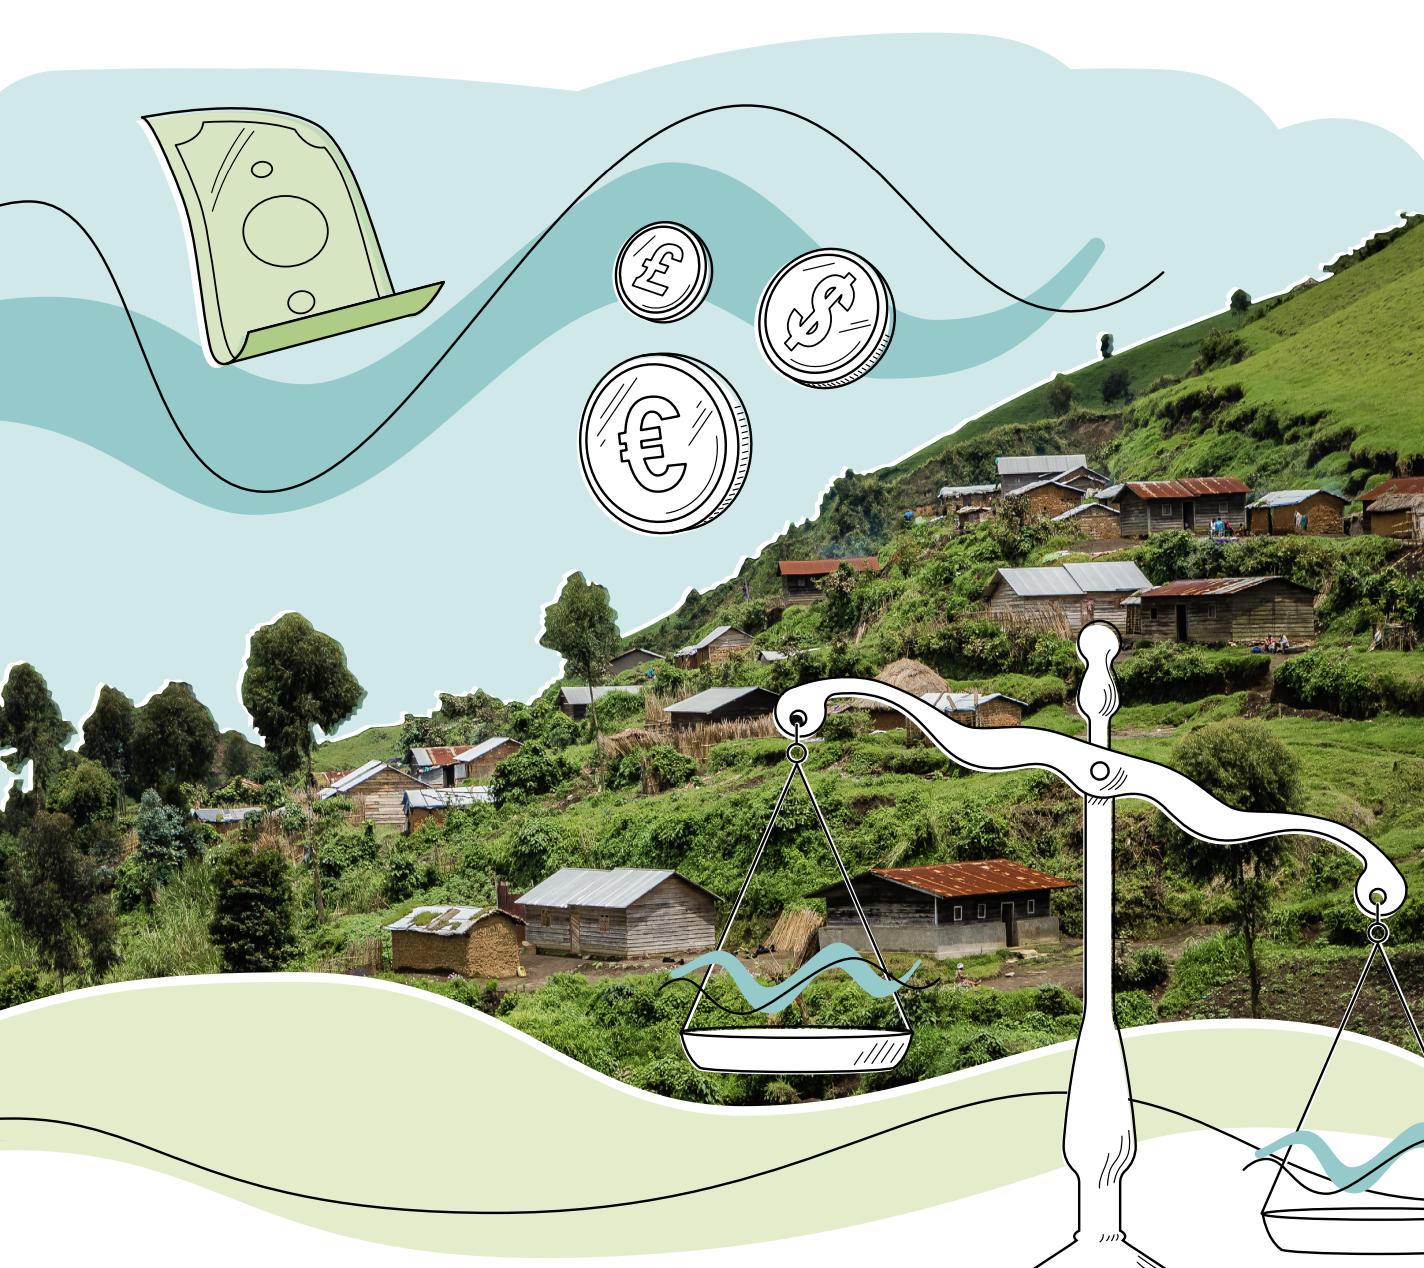 photo of green hill slope with settlements and drawings of money